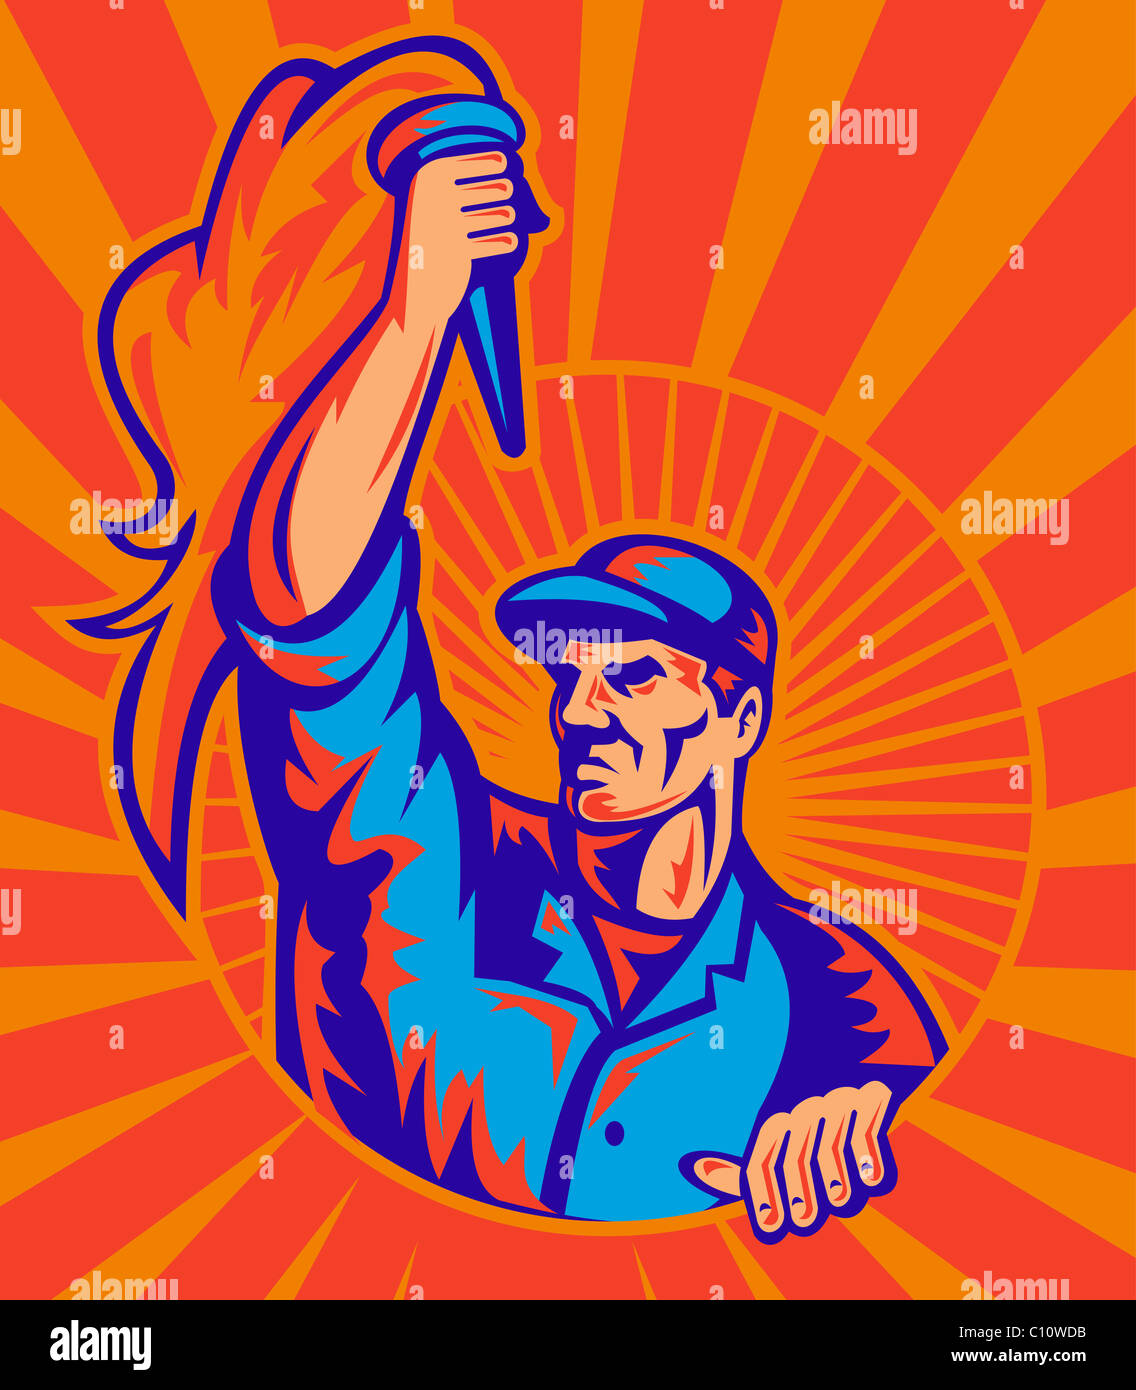 illustration of a male worker carrying flaming torch with sunburst in background done in retro style Stock Photo